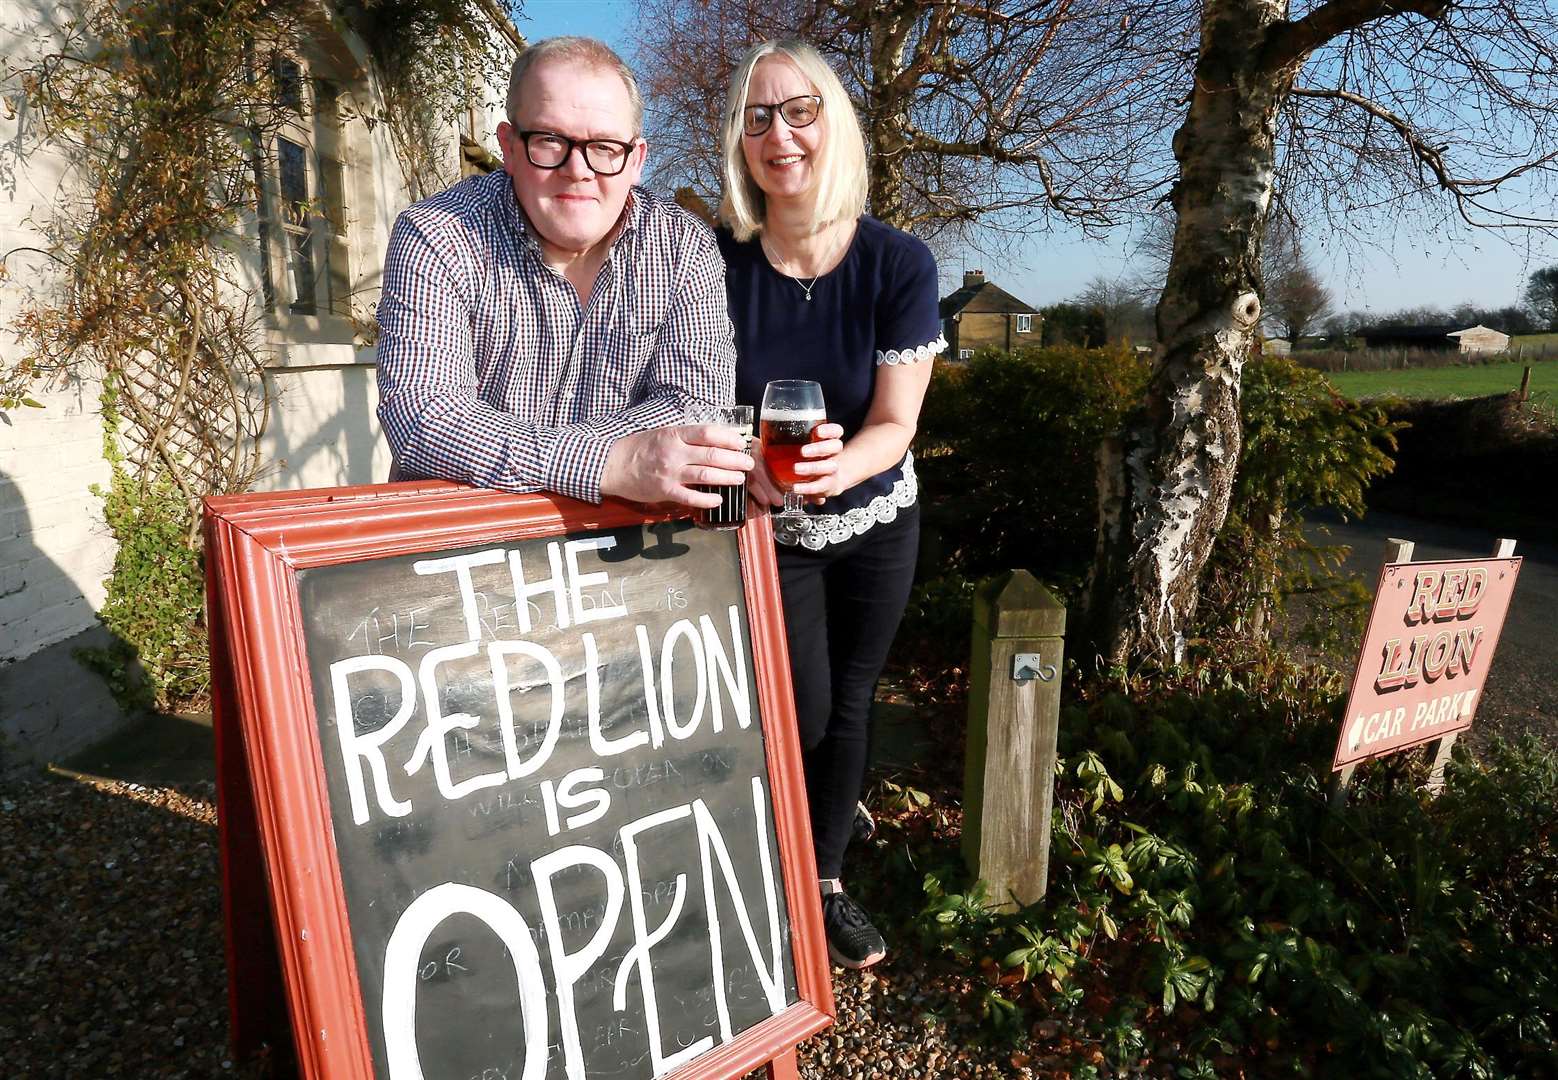 The couple bought the pub for £575,000